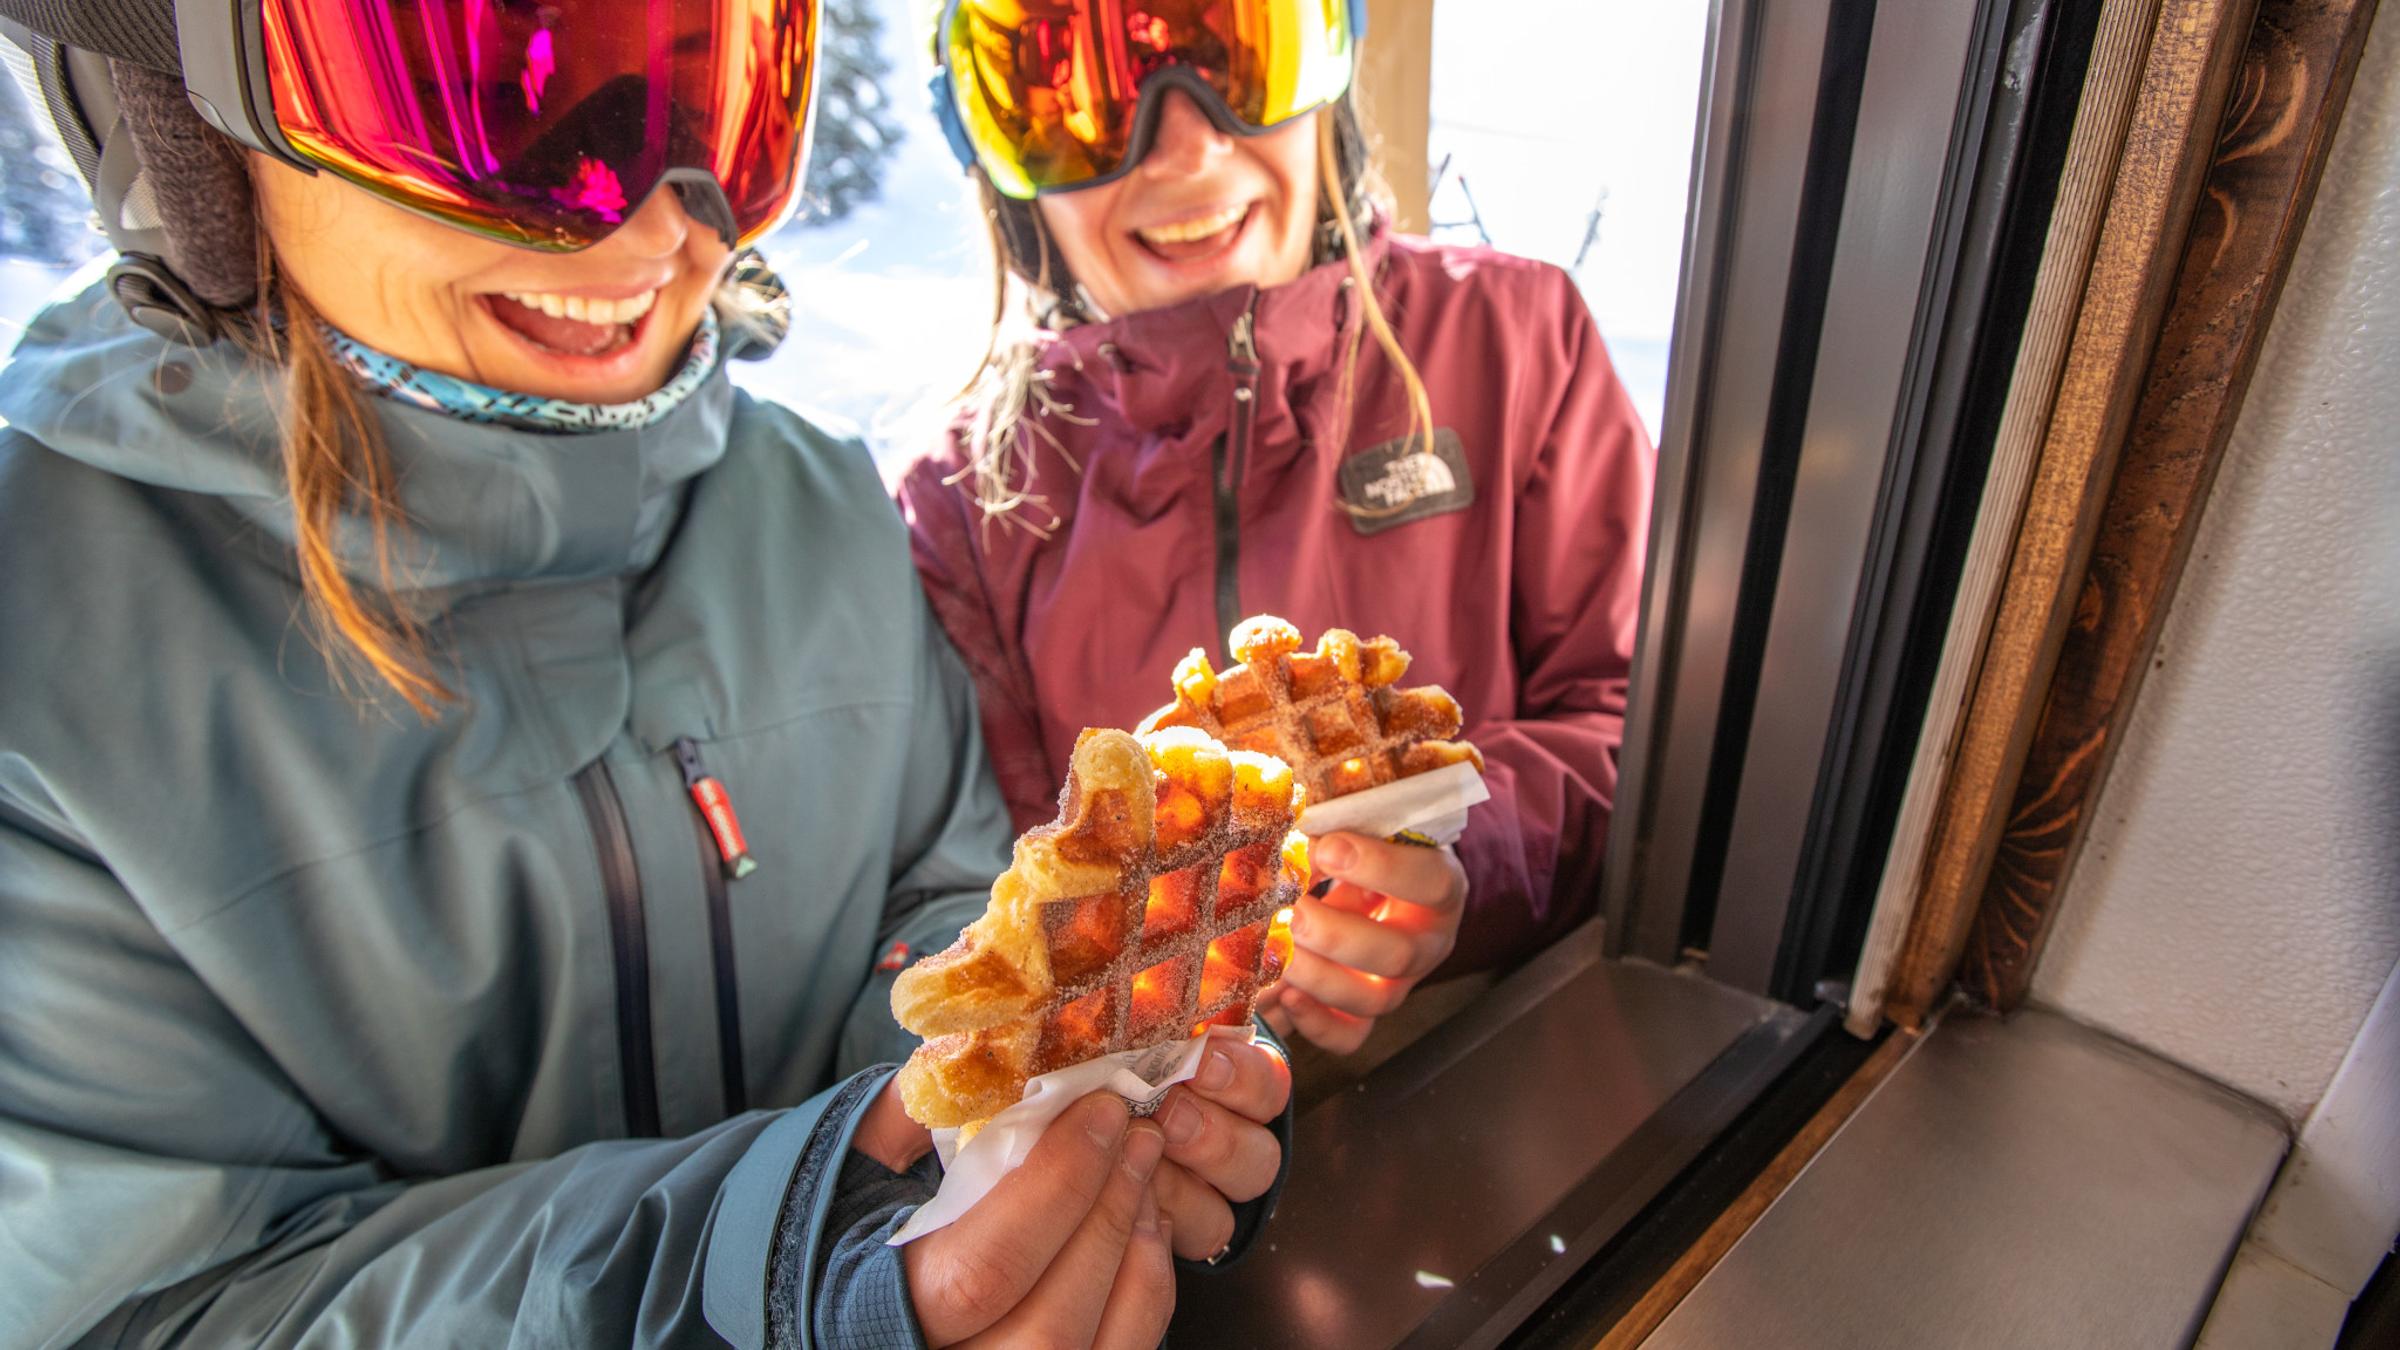 Skiers receiving a waffle from Little Dollie Waffle's window